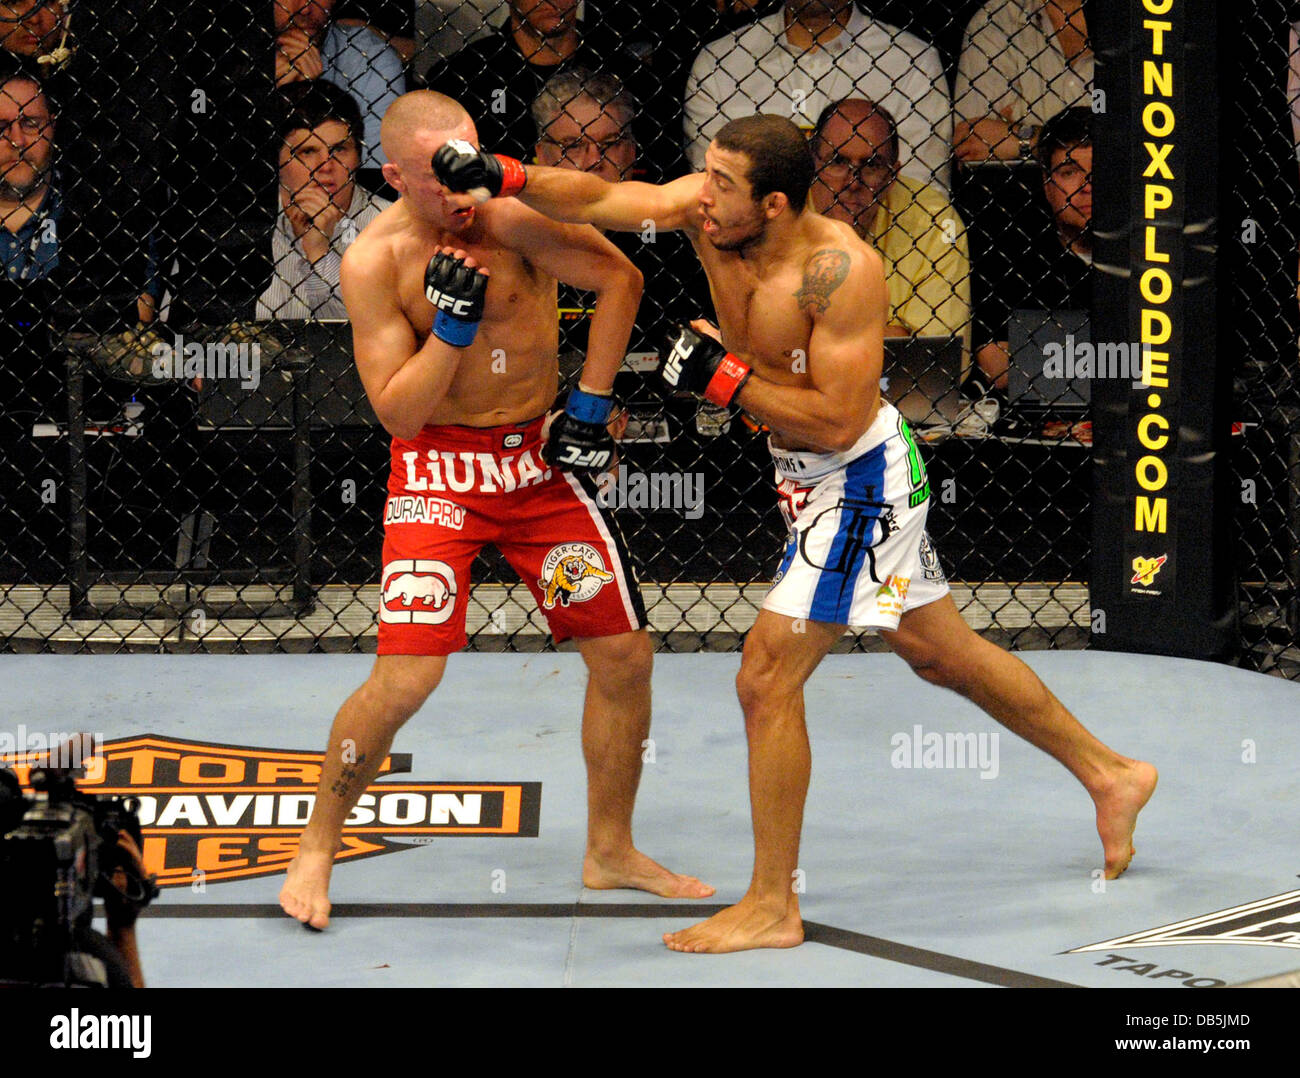 sne Fatal familie Mark Hominick vs Jose Aldo UFC 129 - Featherweight Title Bout held at  Rogers Centre Toronto, Canada - 30.04.11 Stock Photo - Alamy